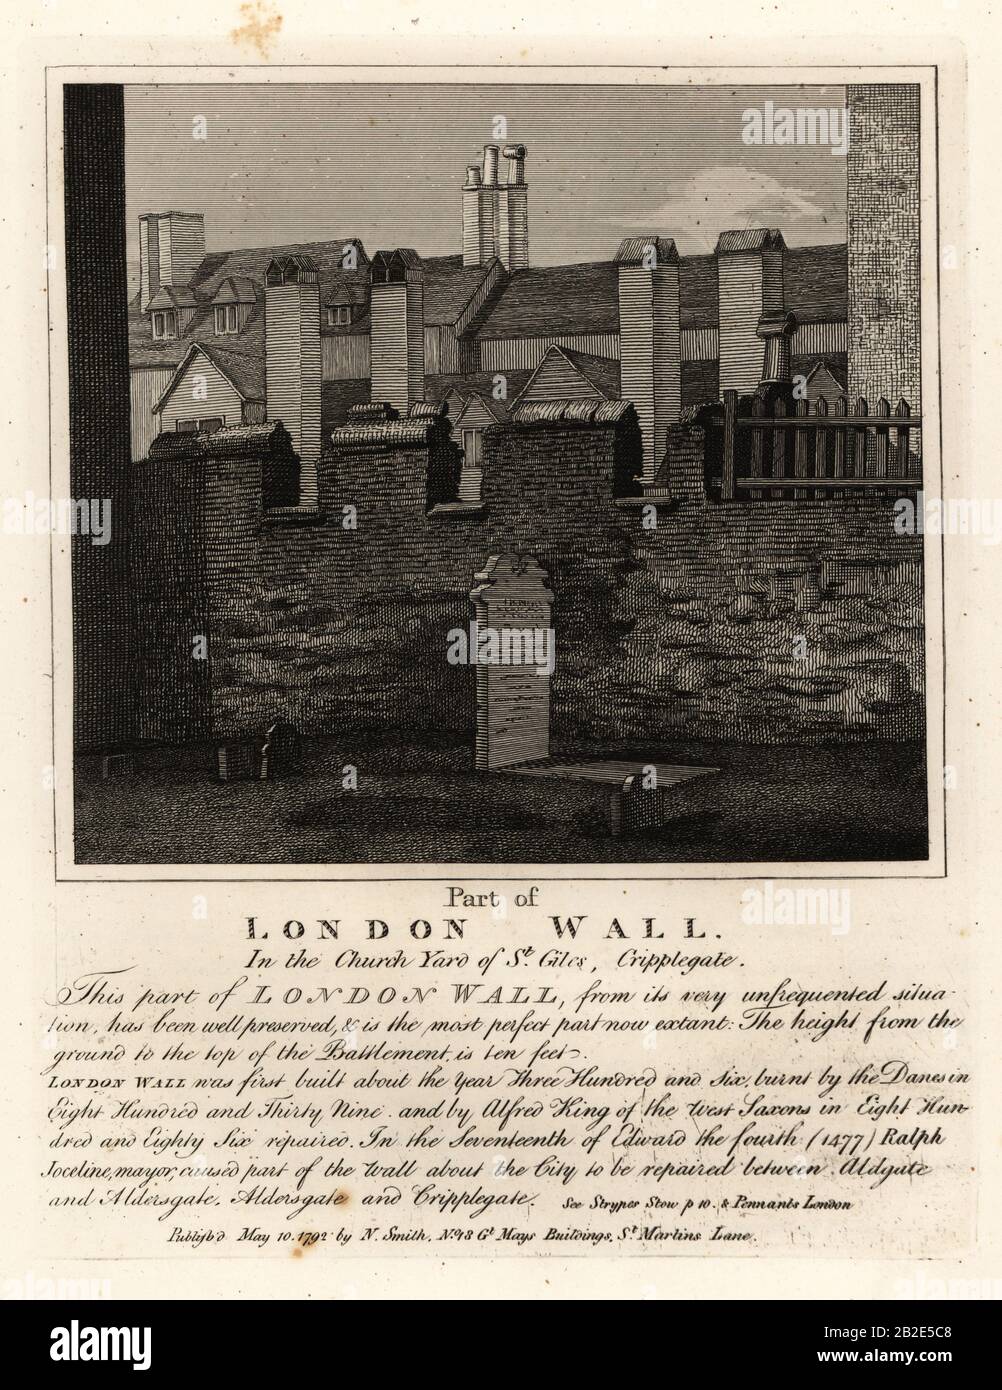 Part of the ancient London Wall in the churchyard of St. Giles, Cripplegate, London. Built in the third century, and repaired by London Mayor Ralph Joceline in 1477. Copperplate engraving by John Thomas Smith after original drawings by members of the Society of Antiquaries from his J.T. Smith’s Antiquities of London and its Environs, J. Sewell, R. Folder, J. Simco, London, 1792. Stock Photo